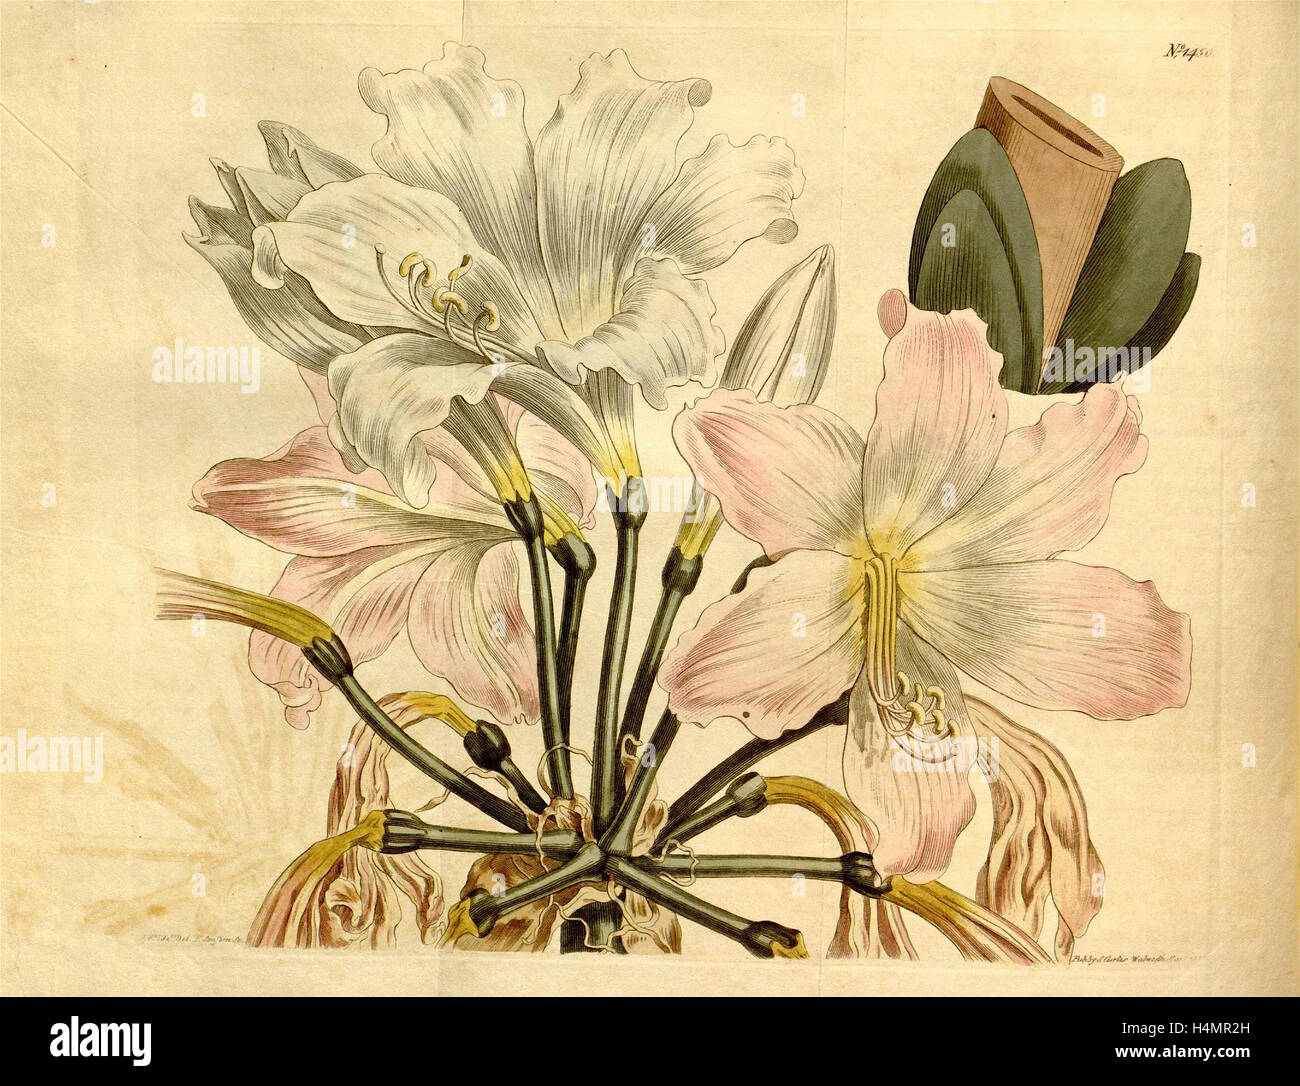 19th century botanical colour print. Botanical illustration. Form, colour, and details of the plant as an art piece. Stock Photo